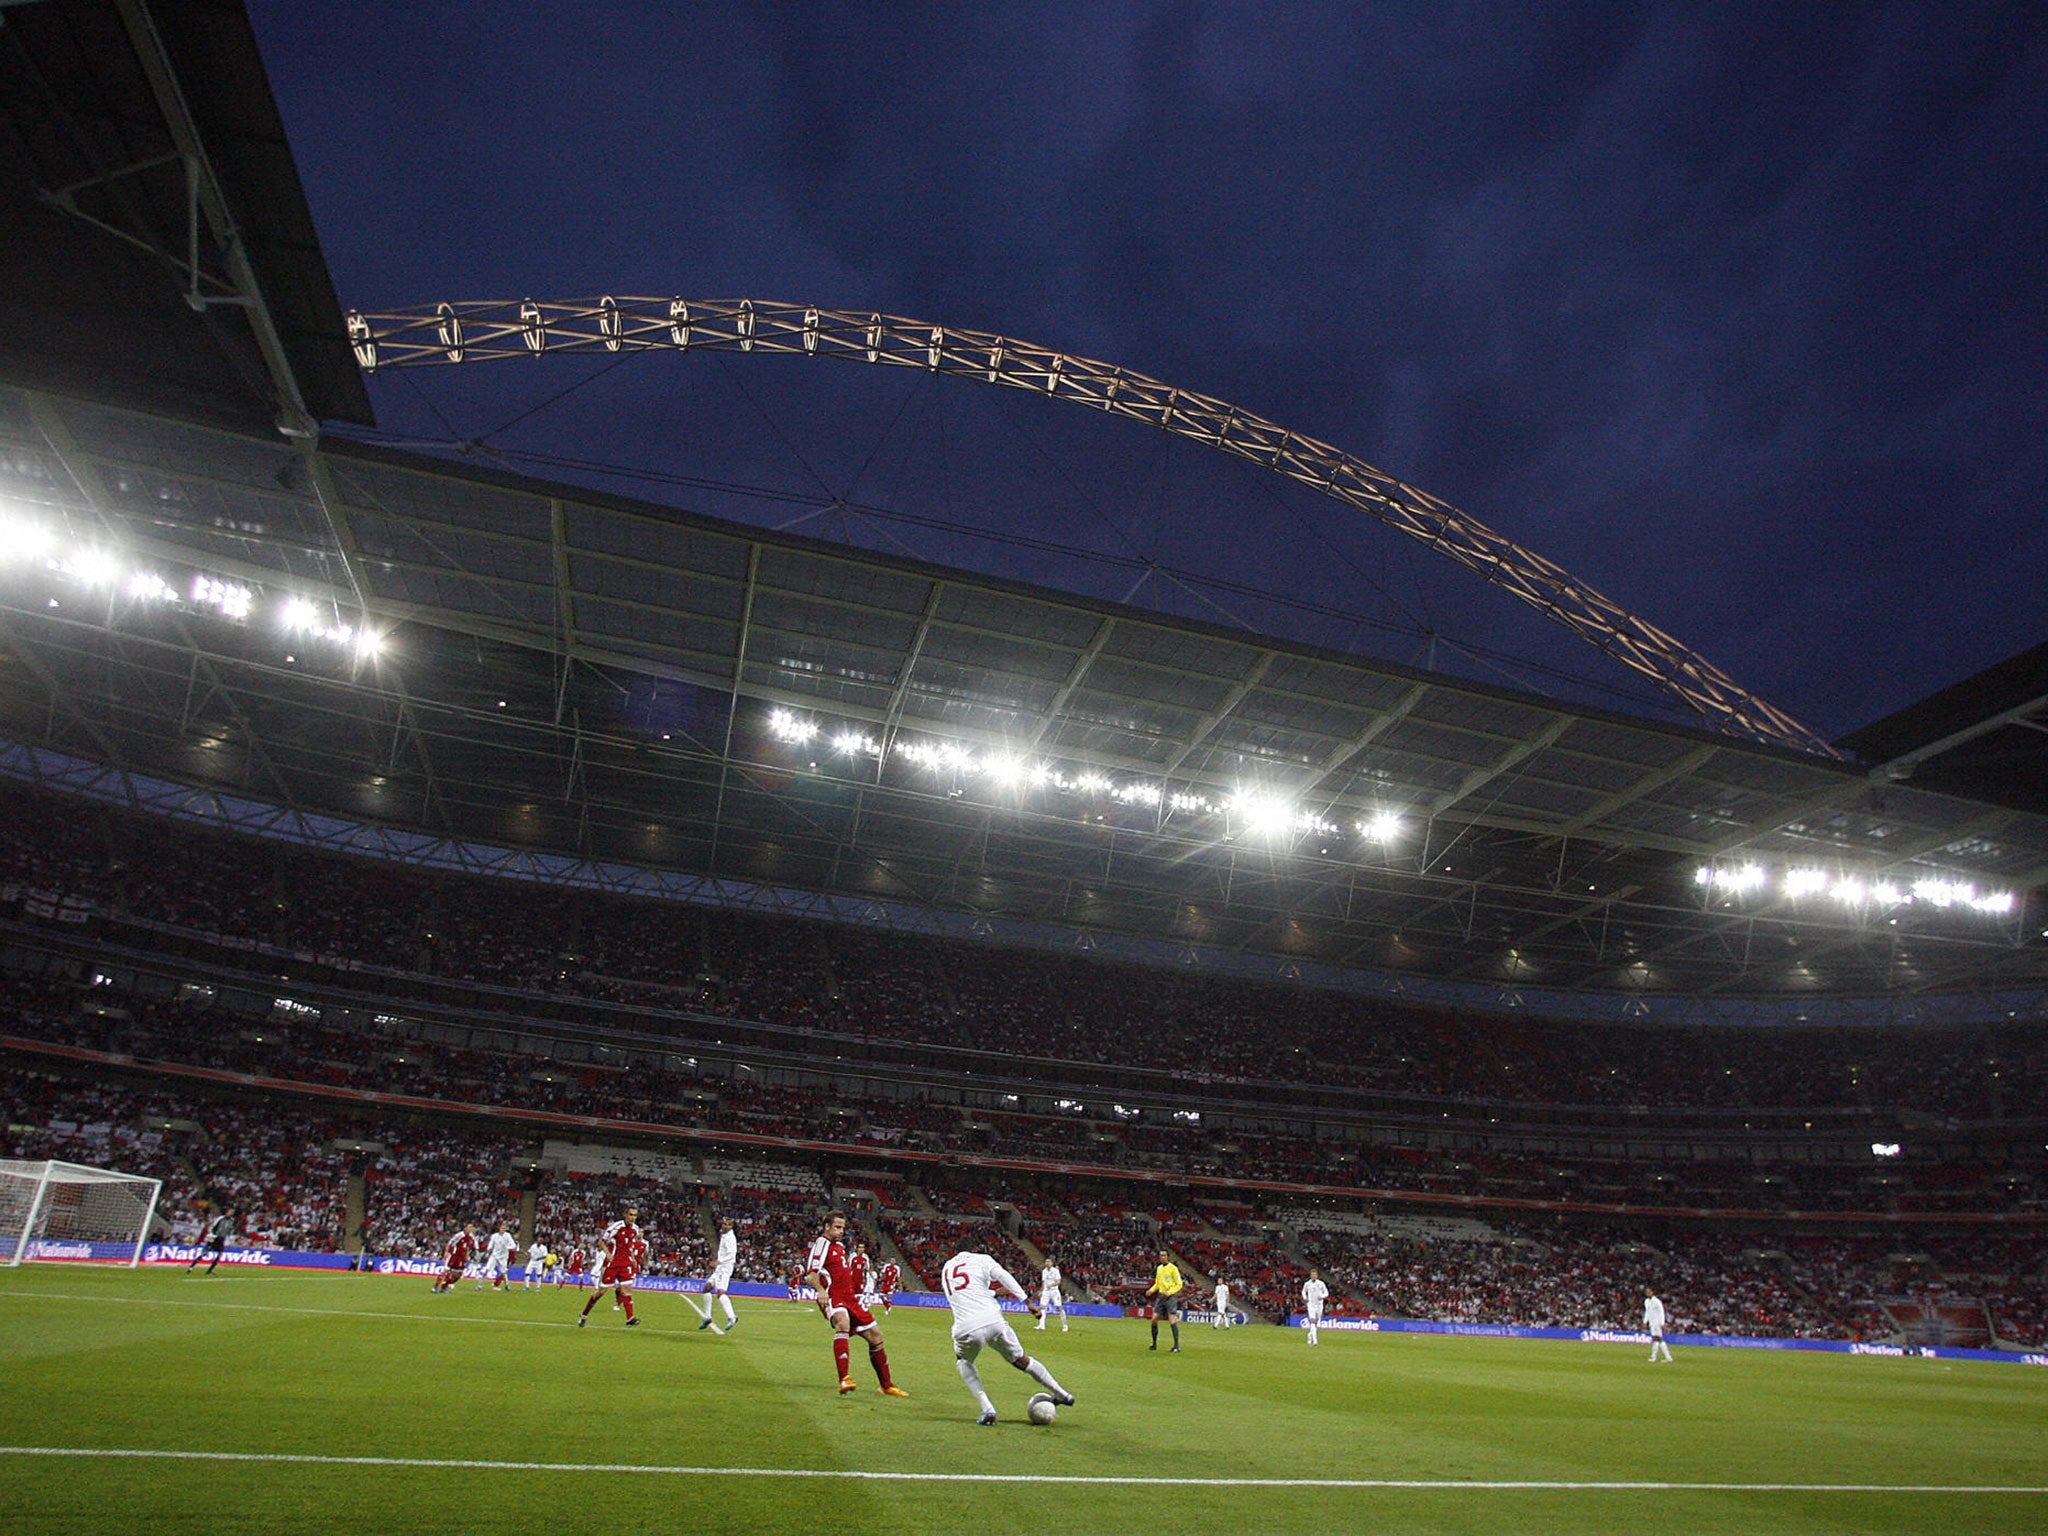 England could have their lowest crowd at the new Wembley since facing Andorra in June 2009